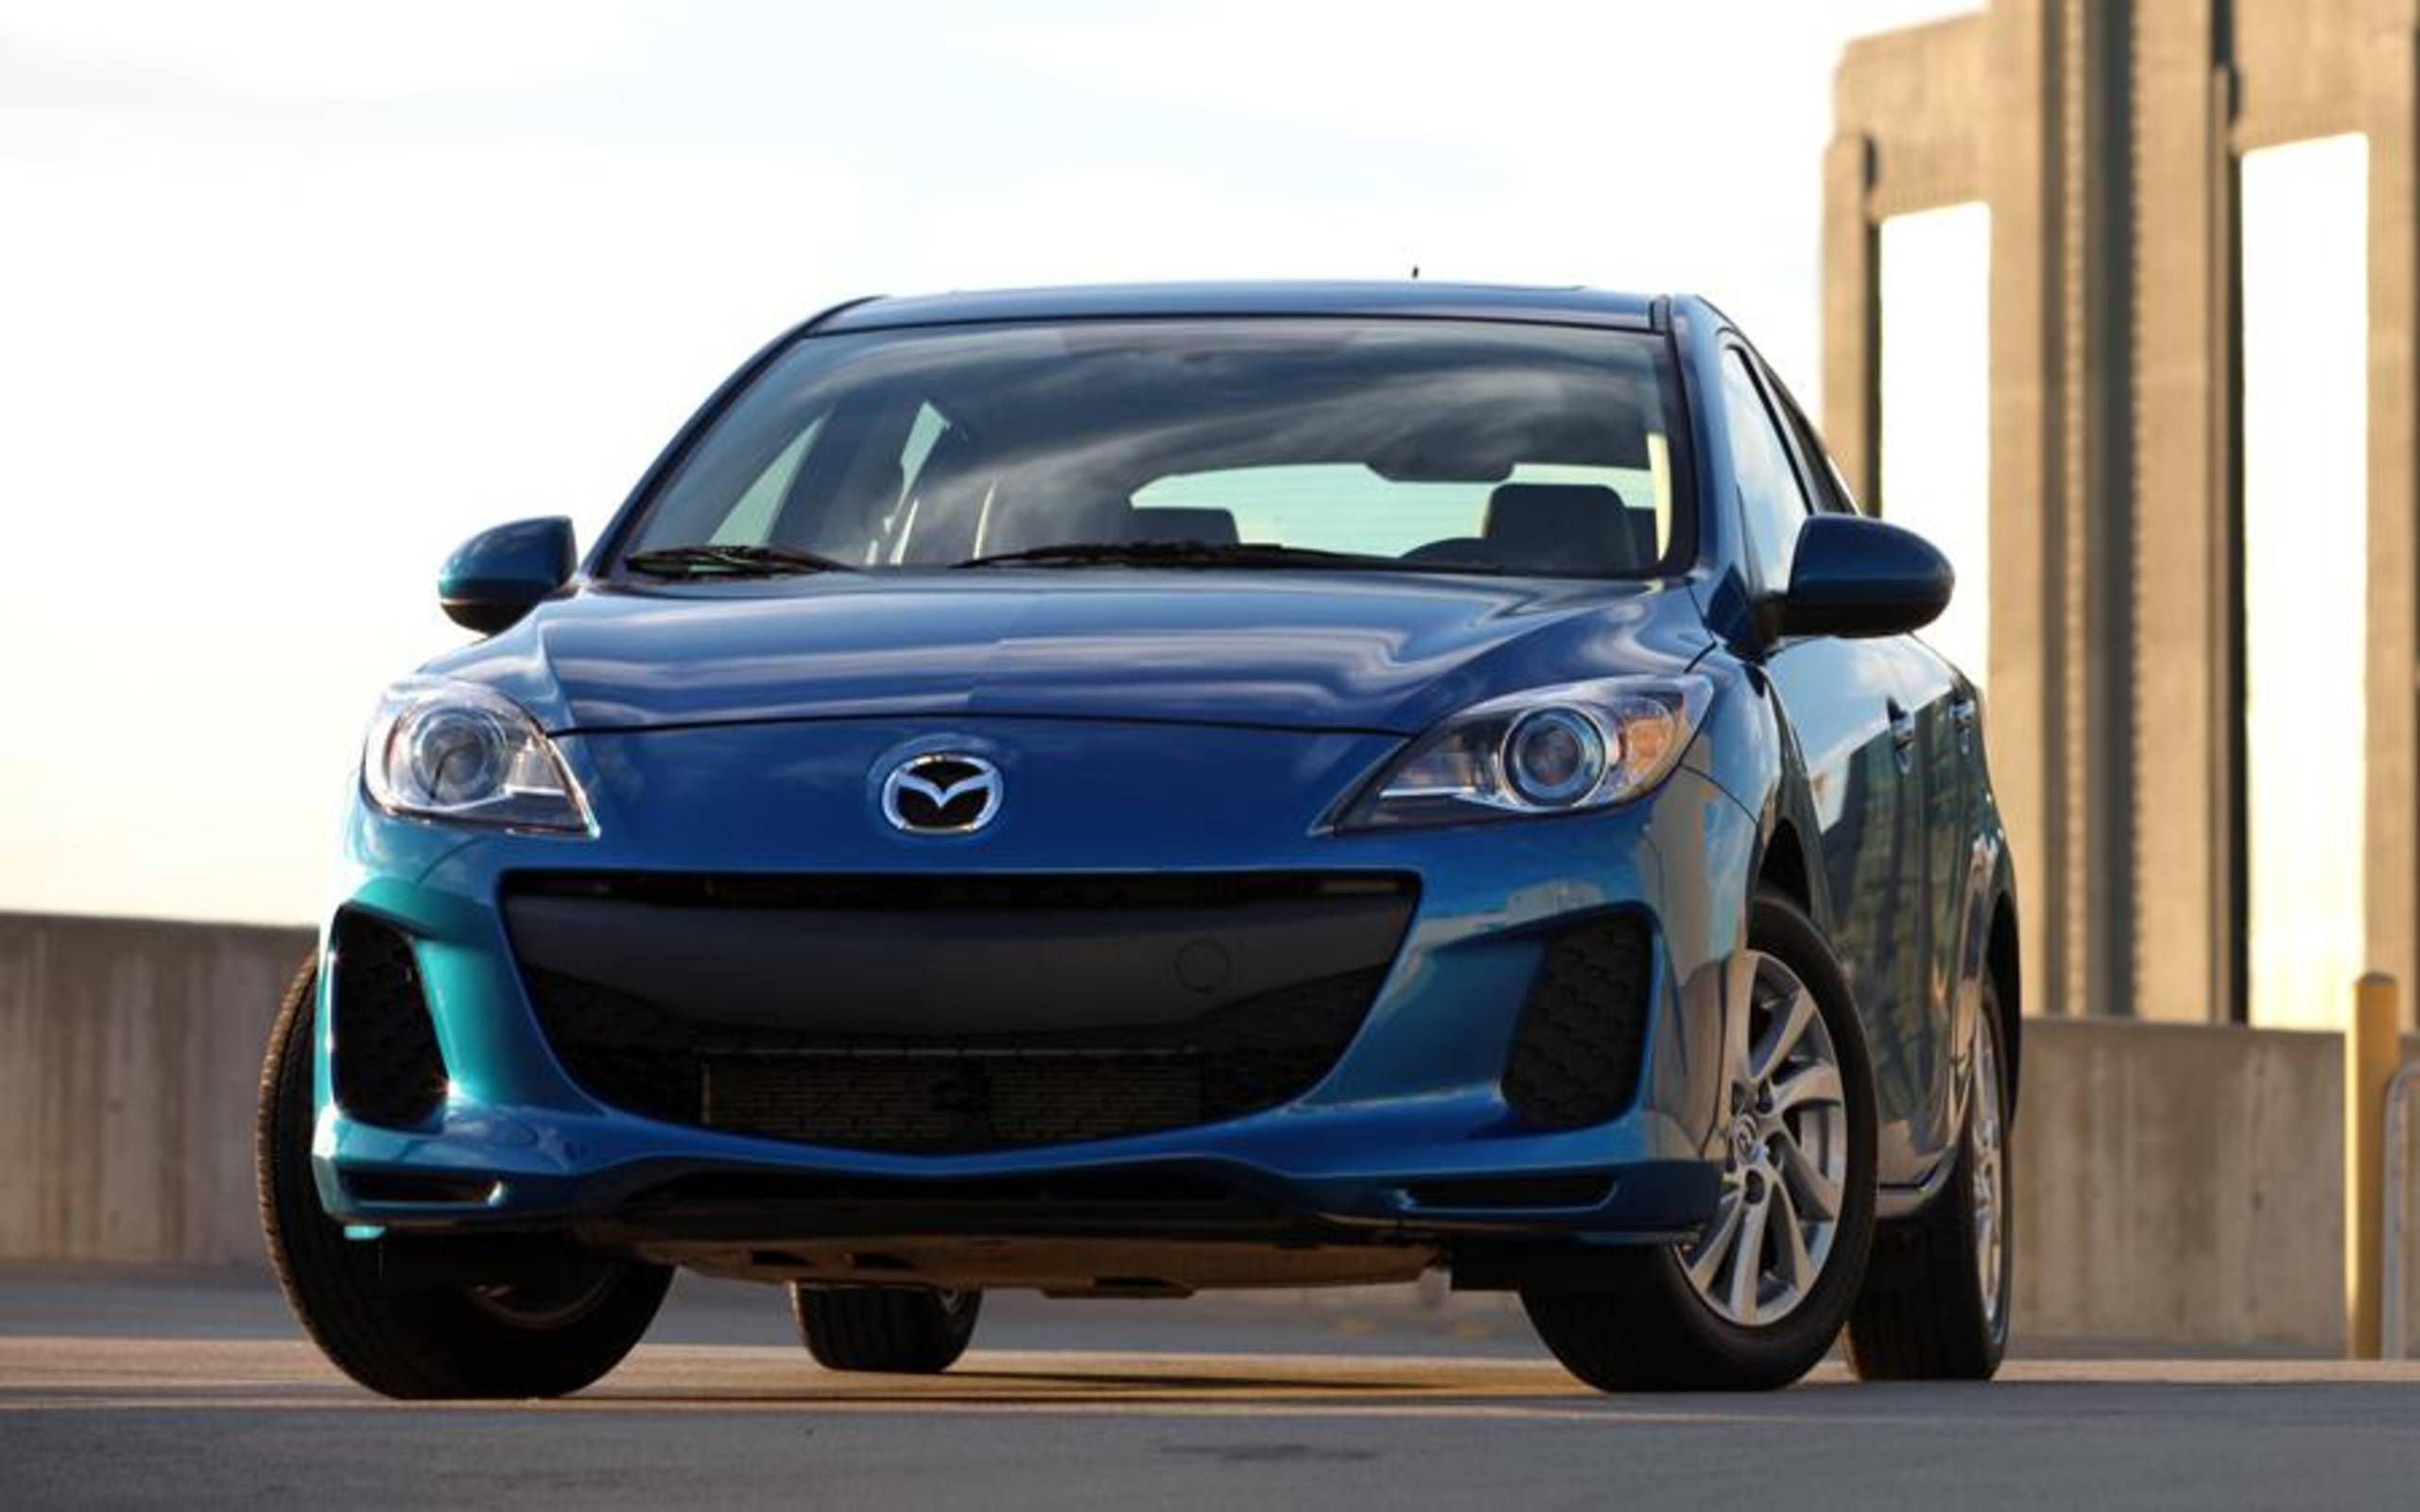 The 2012 Mazda 3: A Sporty, Reliable Car With a Decent Geek Factor